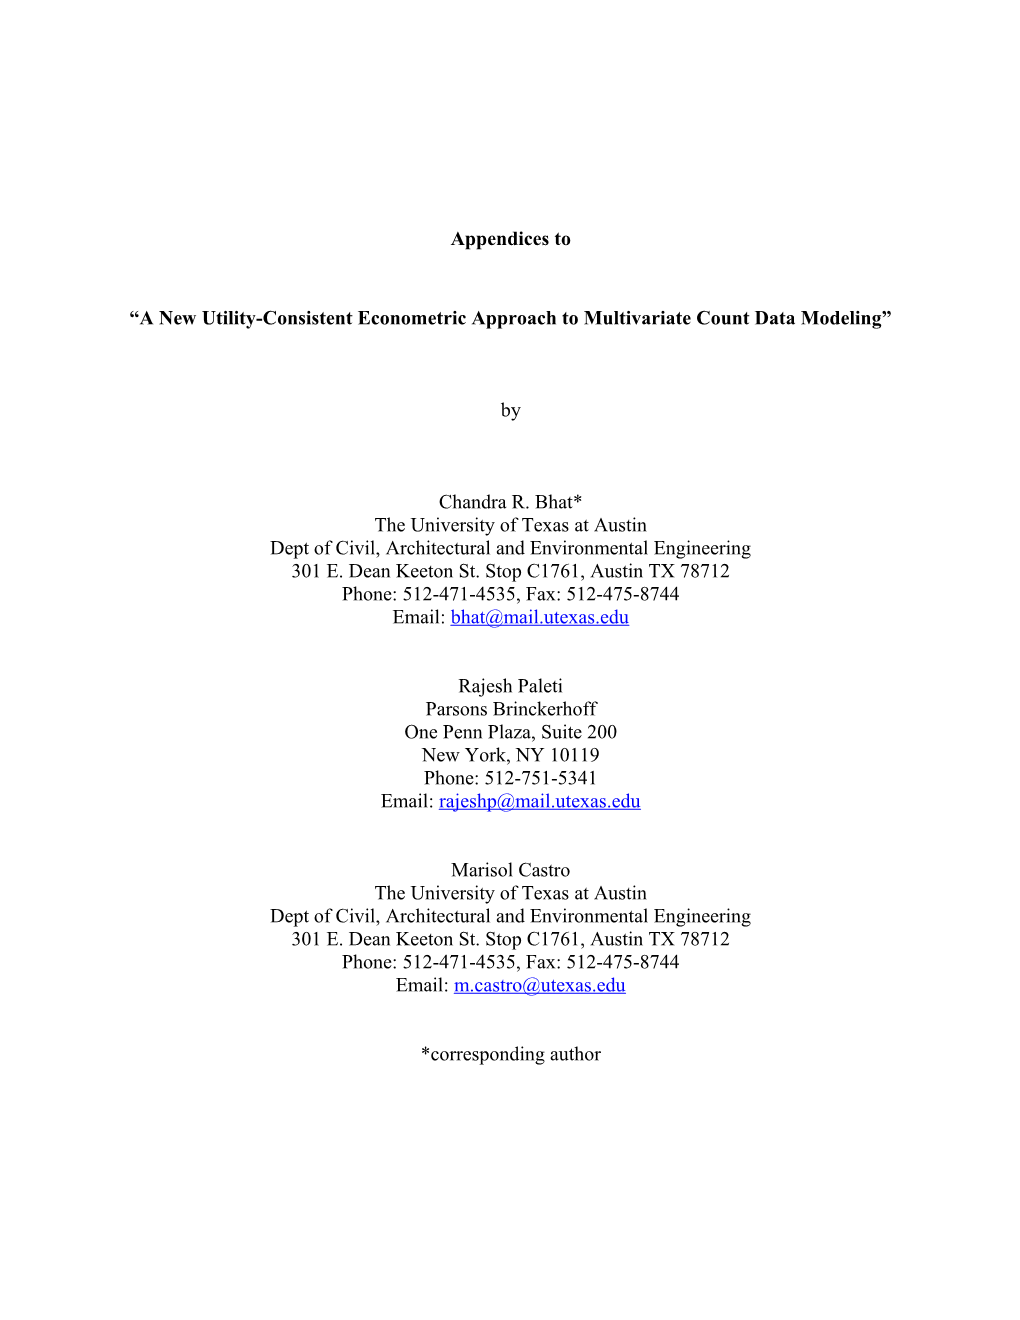 A New Utility-Consistent Econometric Approach to Multivariate Count Data Modeling